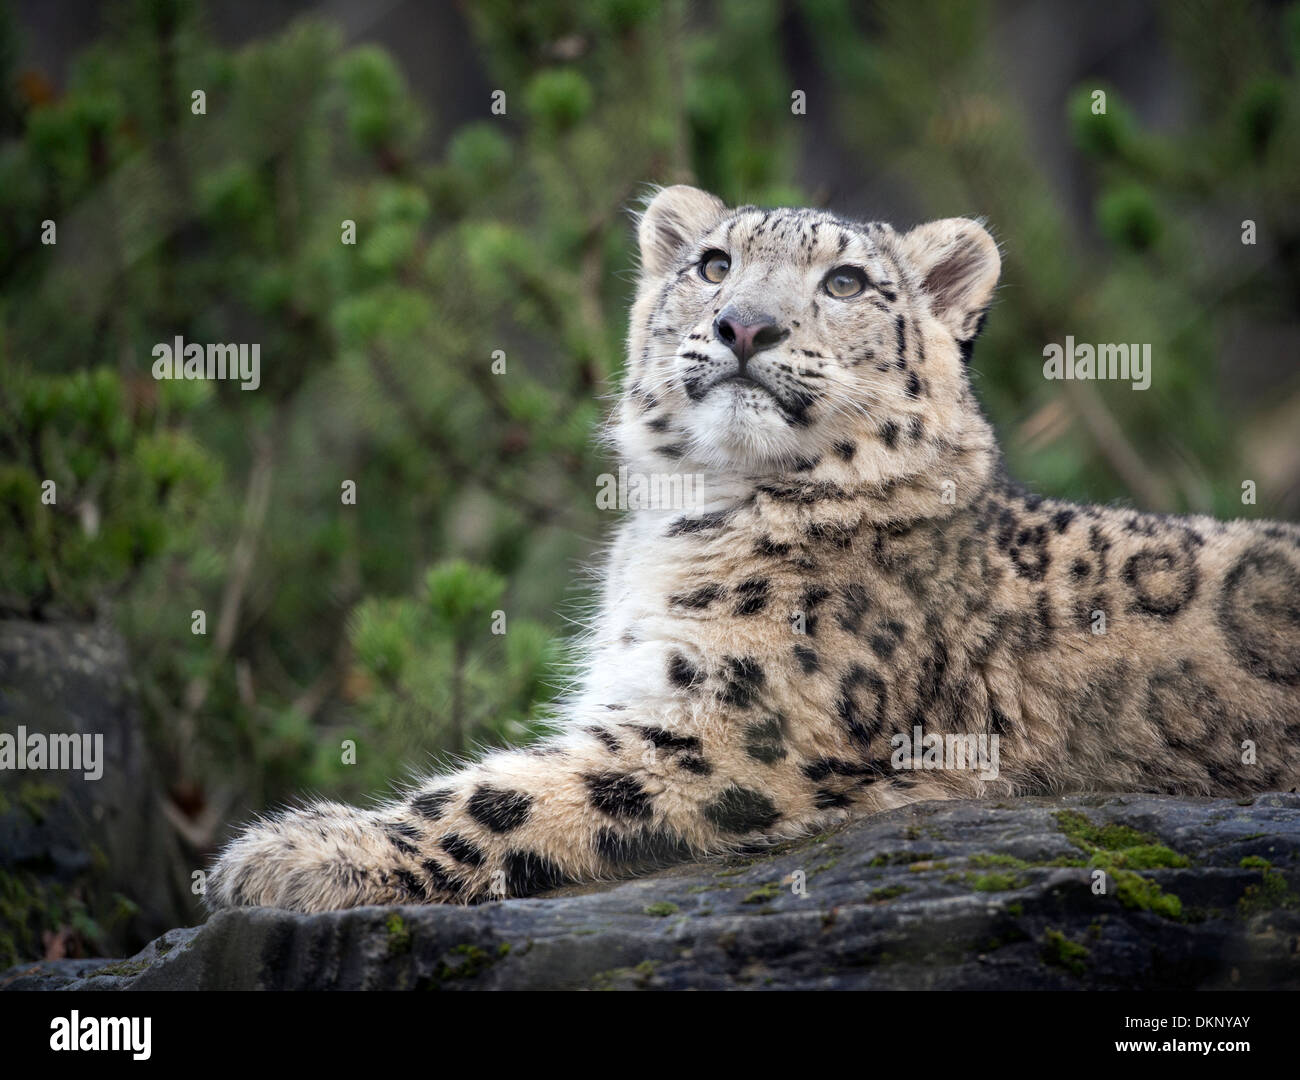 Male snow leopard cub looking up Stock Photo